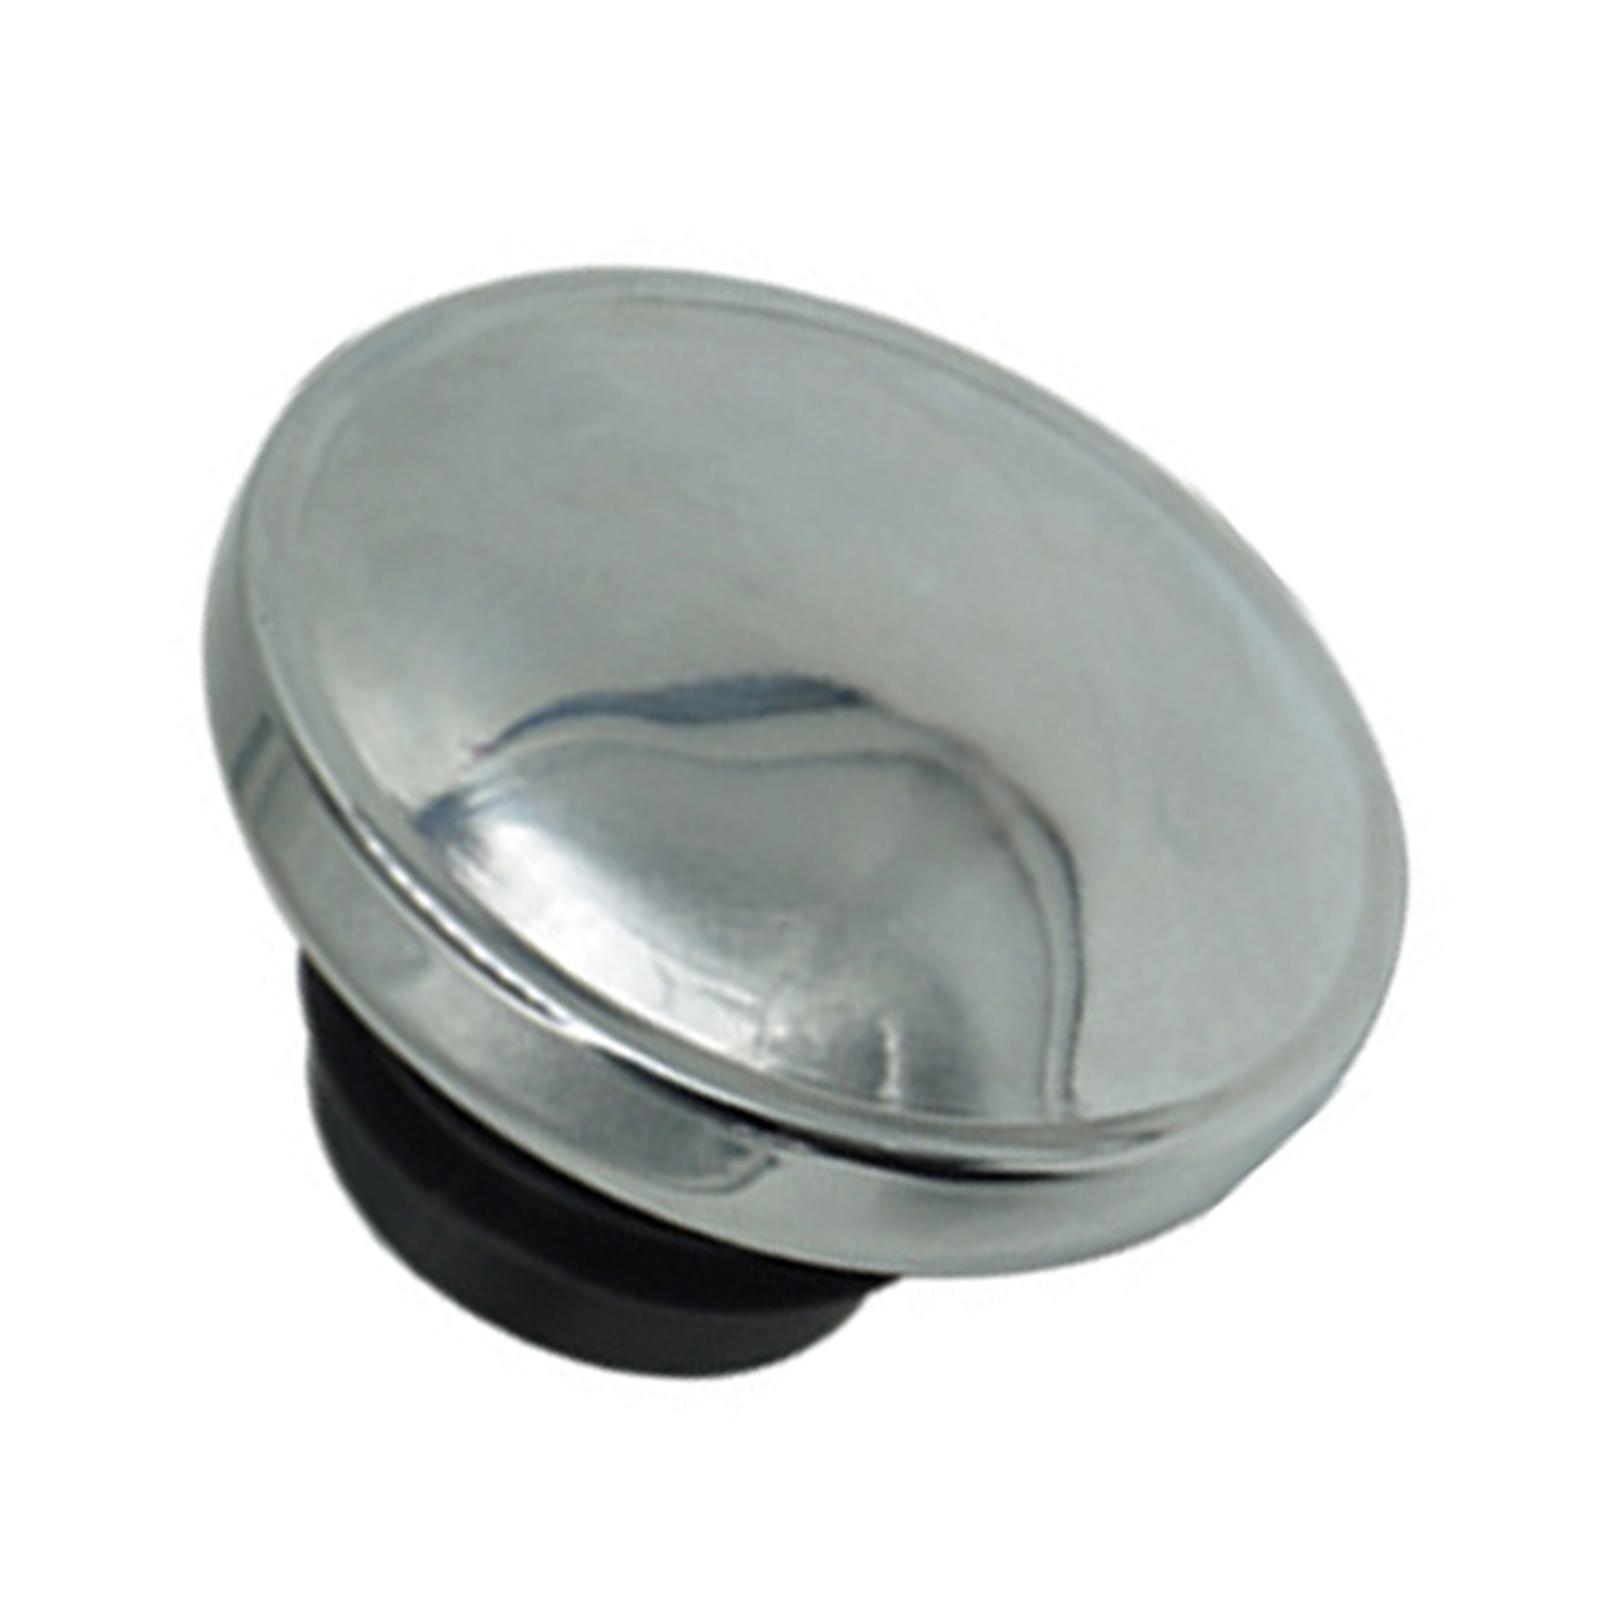 Motorcycle Fuel Caps Lock Aluminum Alloy Oil Tank Cap for 883 Spare Parts Replacement